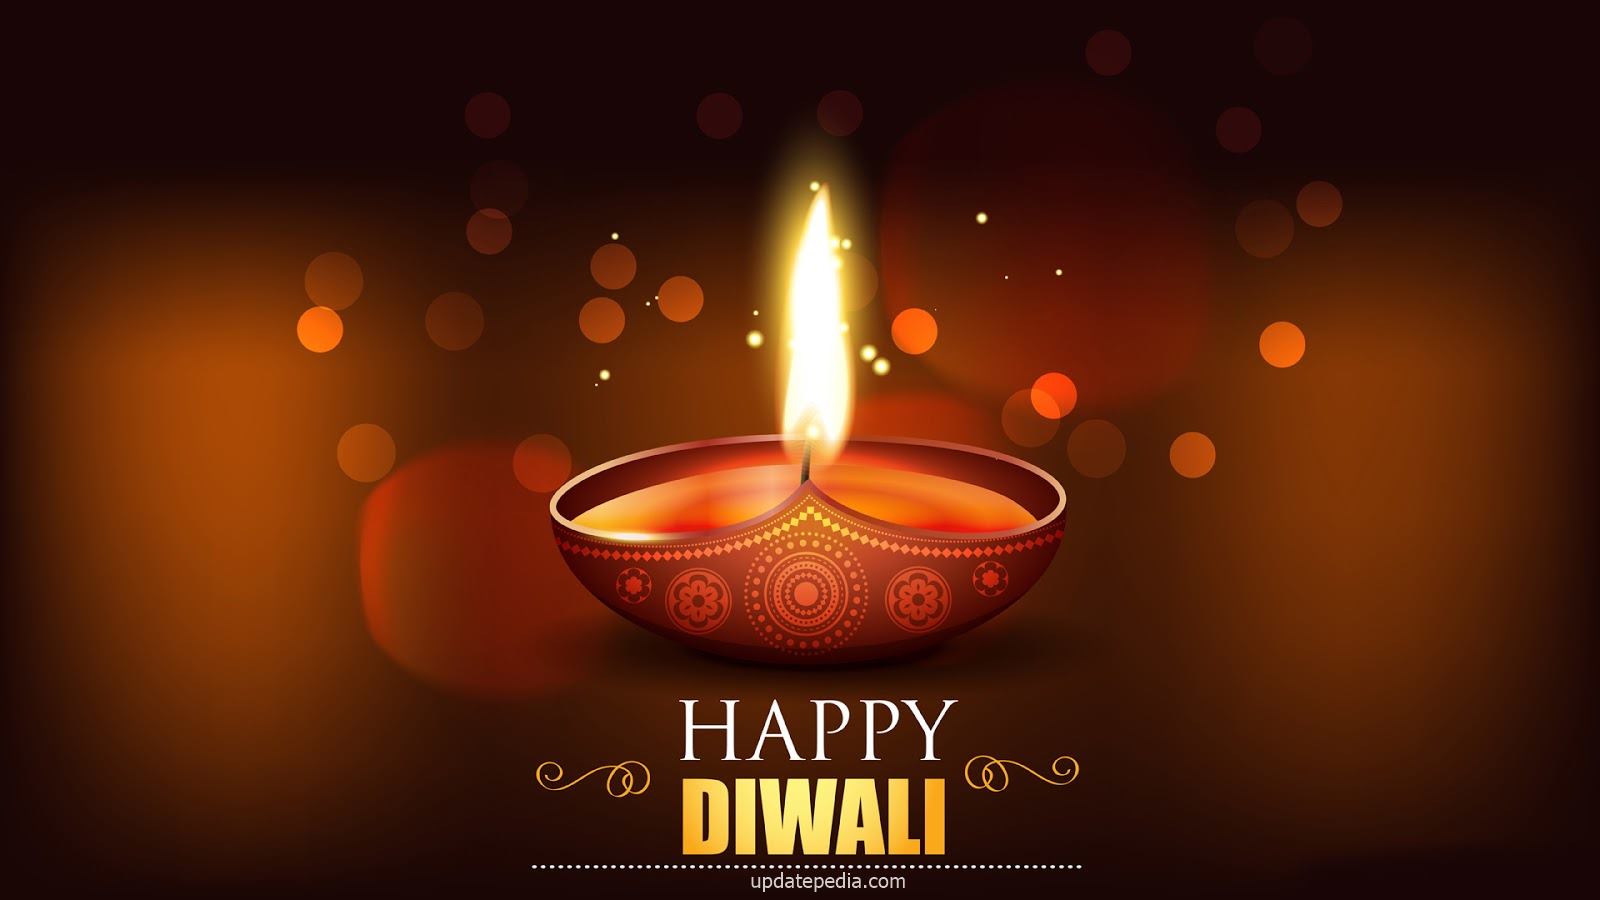 101+ Happy Diwali Greeting Images, Wishes Pictures & Wallpaper